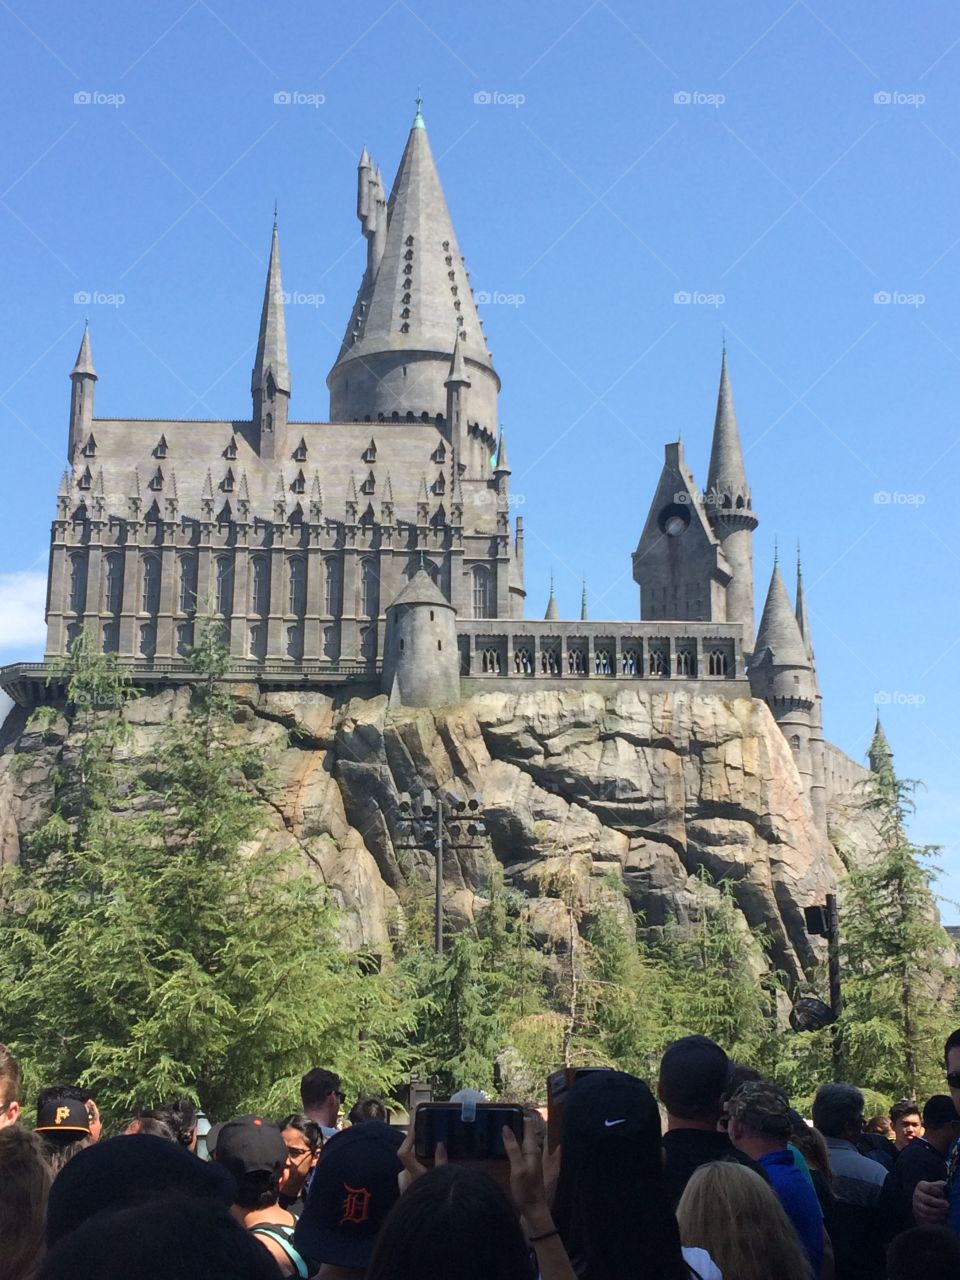 A beautiful sunlit shot of Universal Studios’ Hogwarts Castle atop a rocky platform. Y’all green trees feather the bottom of the hill.